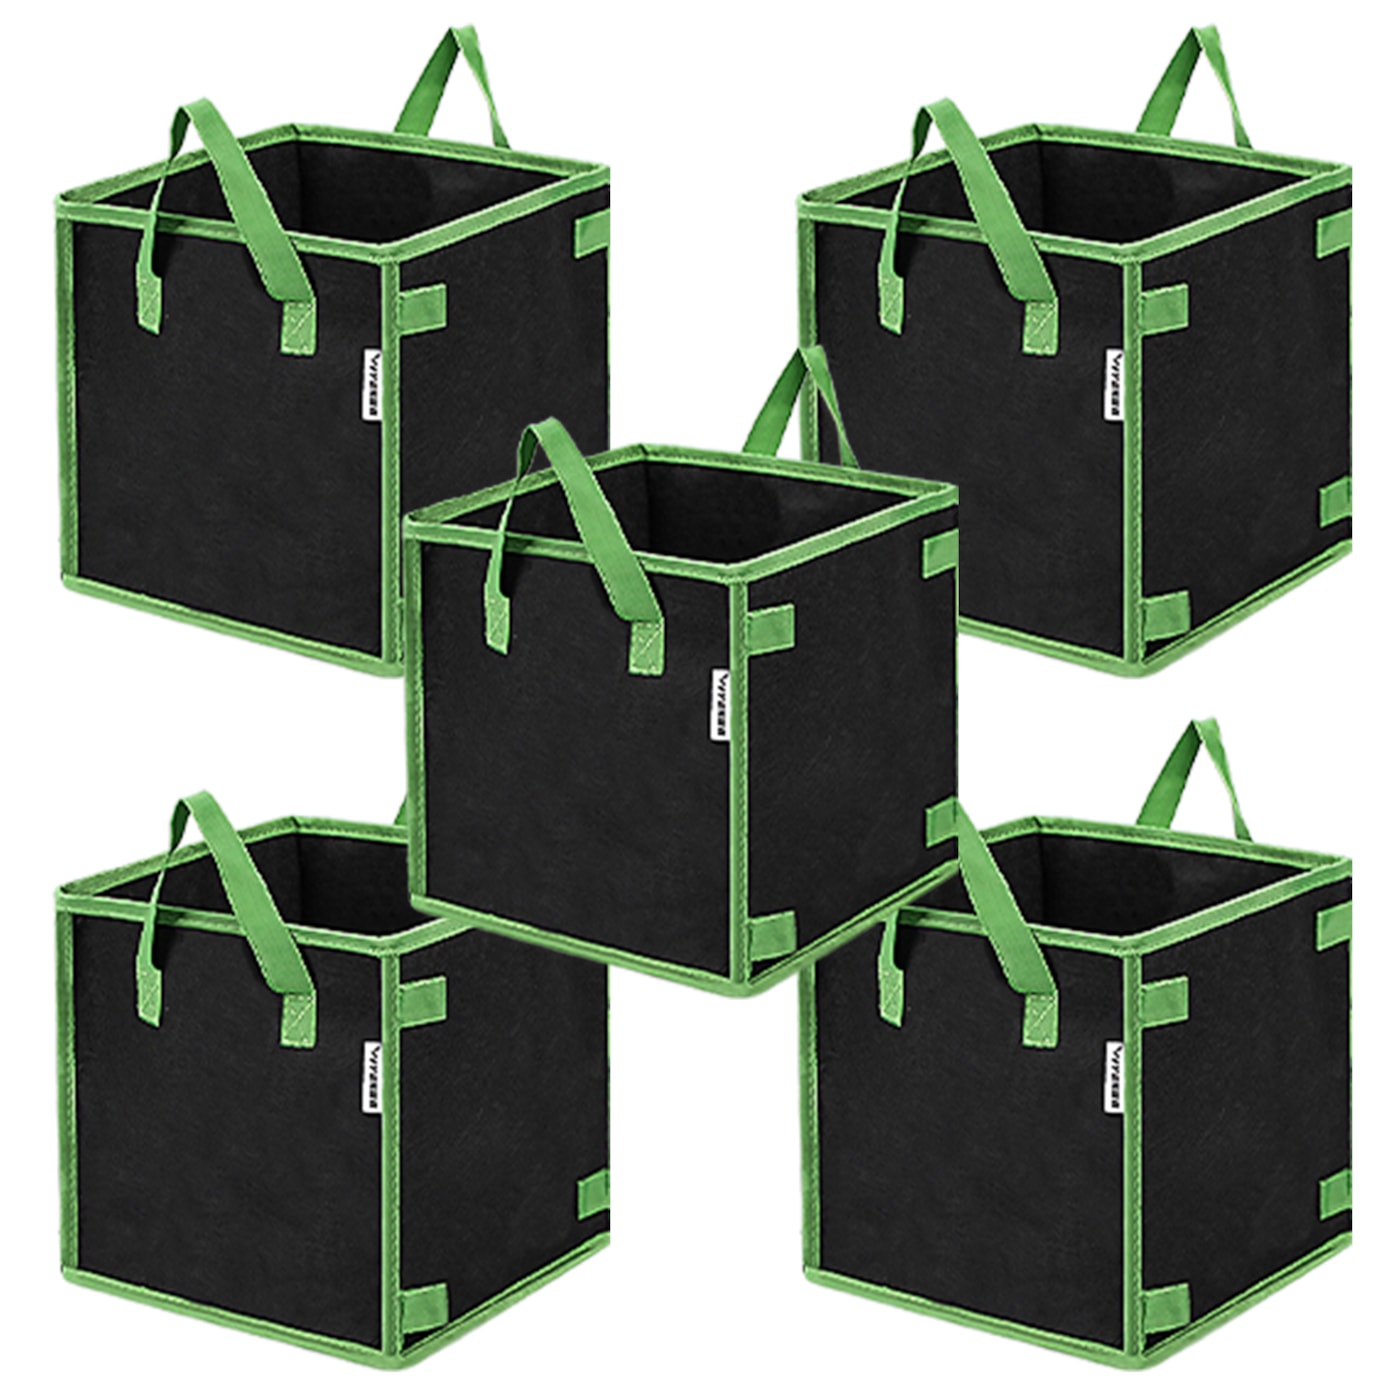 VIVOSUN 3 Gallon Square Grow Bags 5-Pack Black Thickened Nonwoven Fabric Pots with Handles